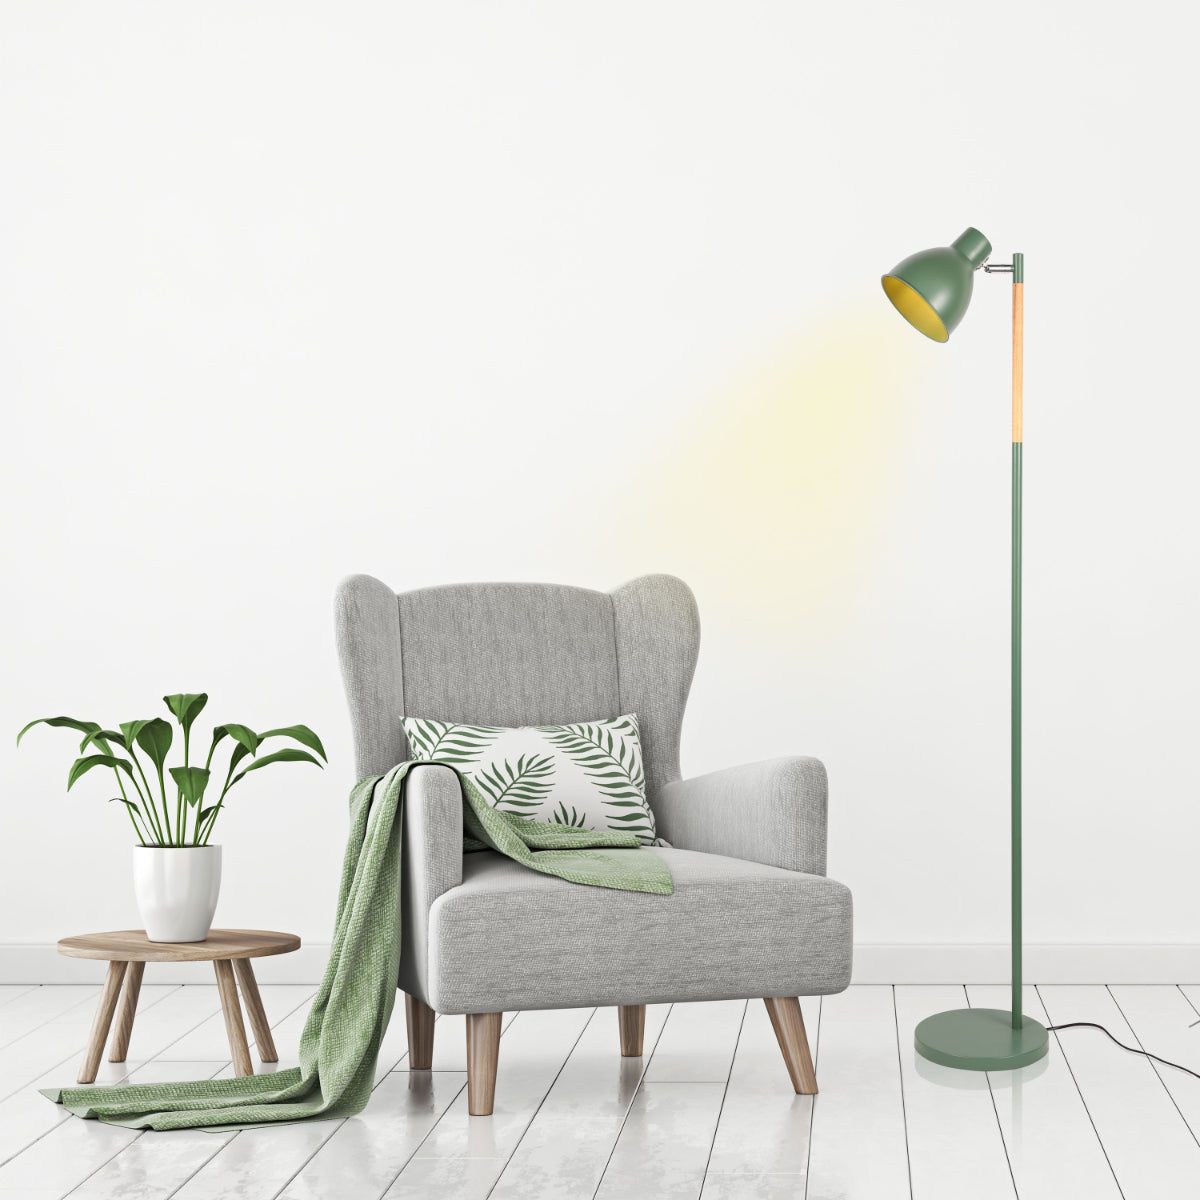 Nordic Floor Lamp with Wood Accent - E27, Rotatable Shade, 3 Finishes 130-03530 in play